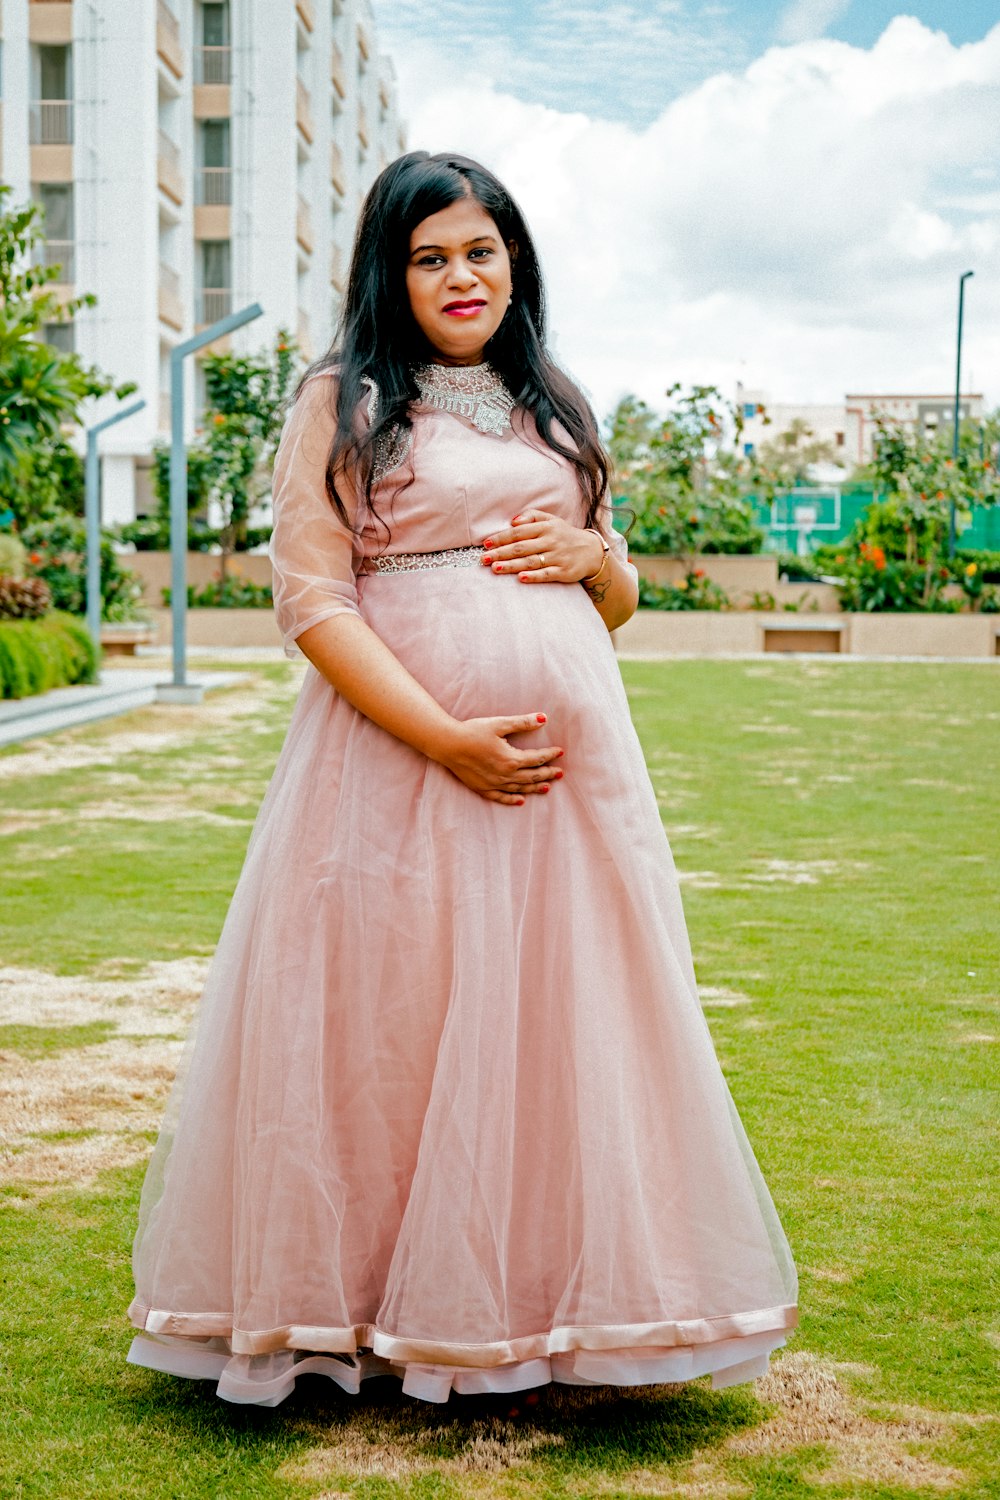 a pregnant woman in a pink dress poses for a picture